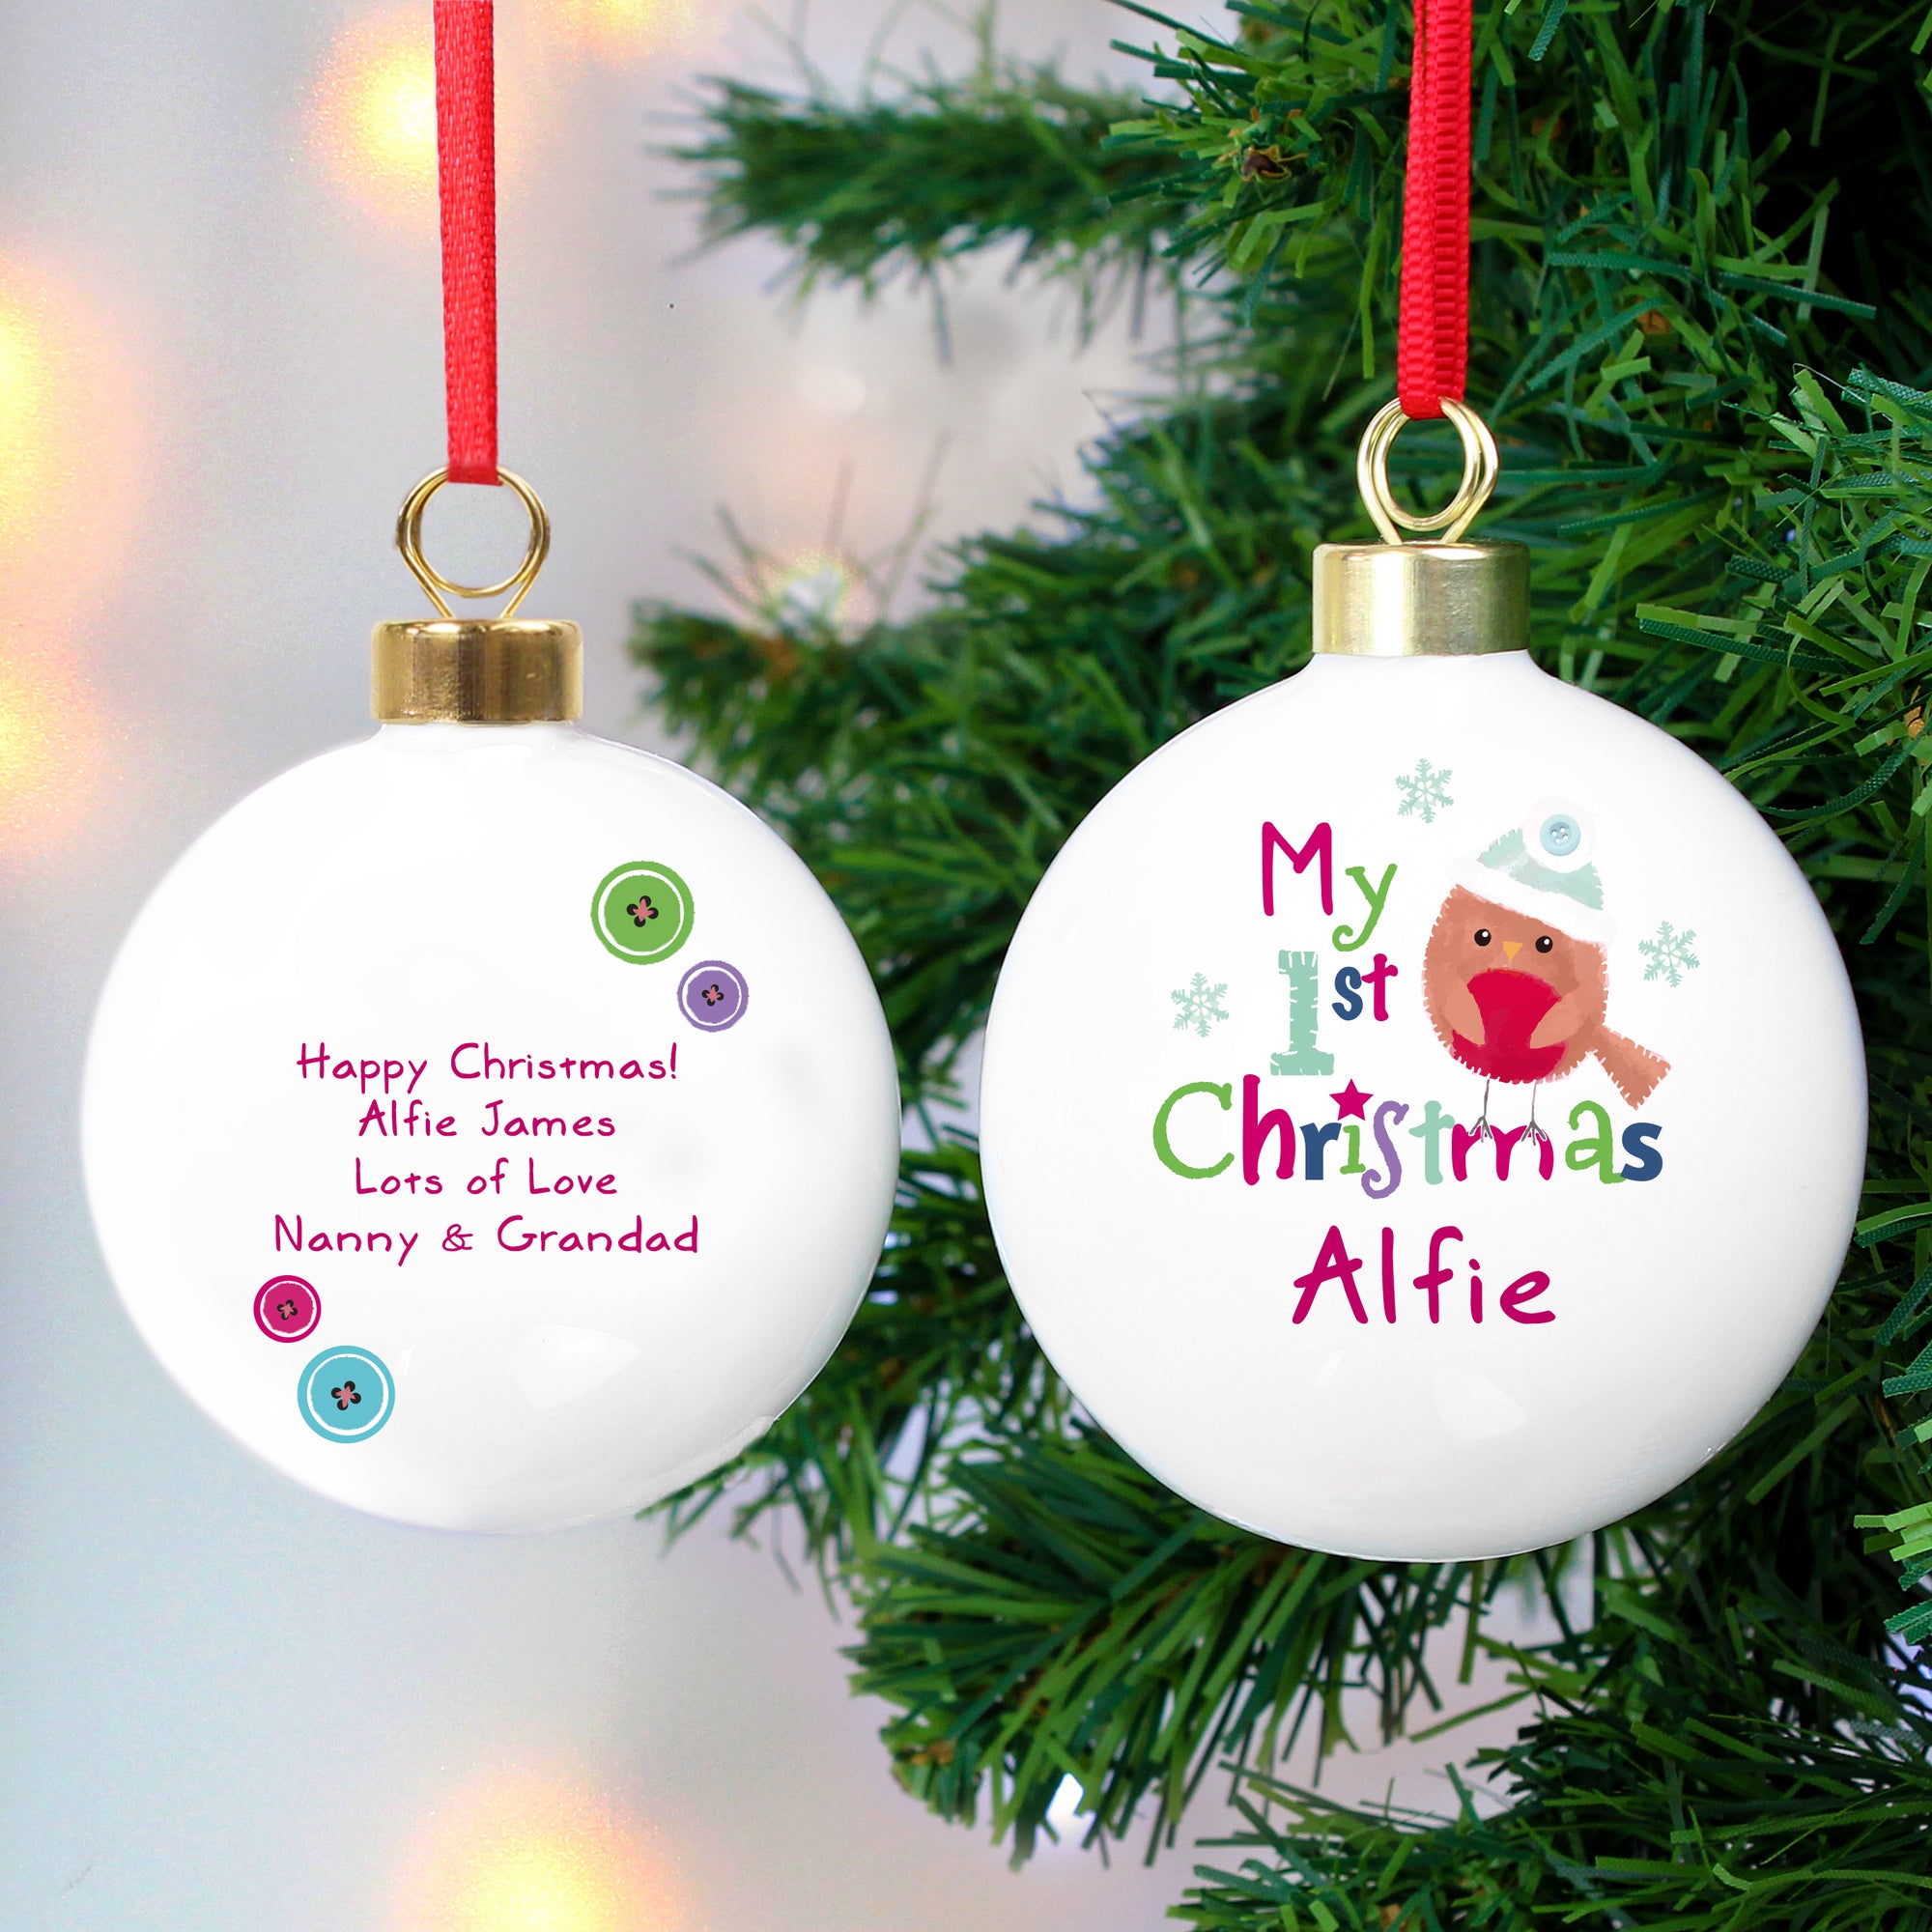 Personalised white ceramic 'My 1st Christmas' Christmas tree bauble featuring an image of a hand-drawn robin. The front of the bauble can be personalised with a name of your choice and the rear of the bauble can be personalised with a message of your choice over up to 4 lines of text.